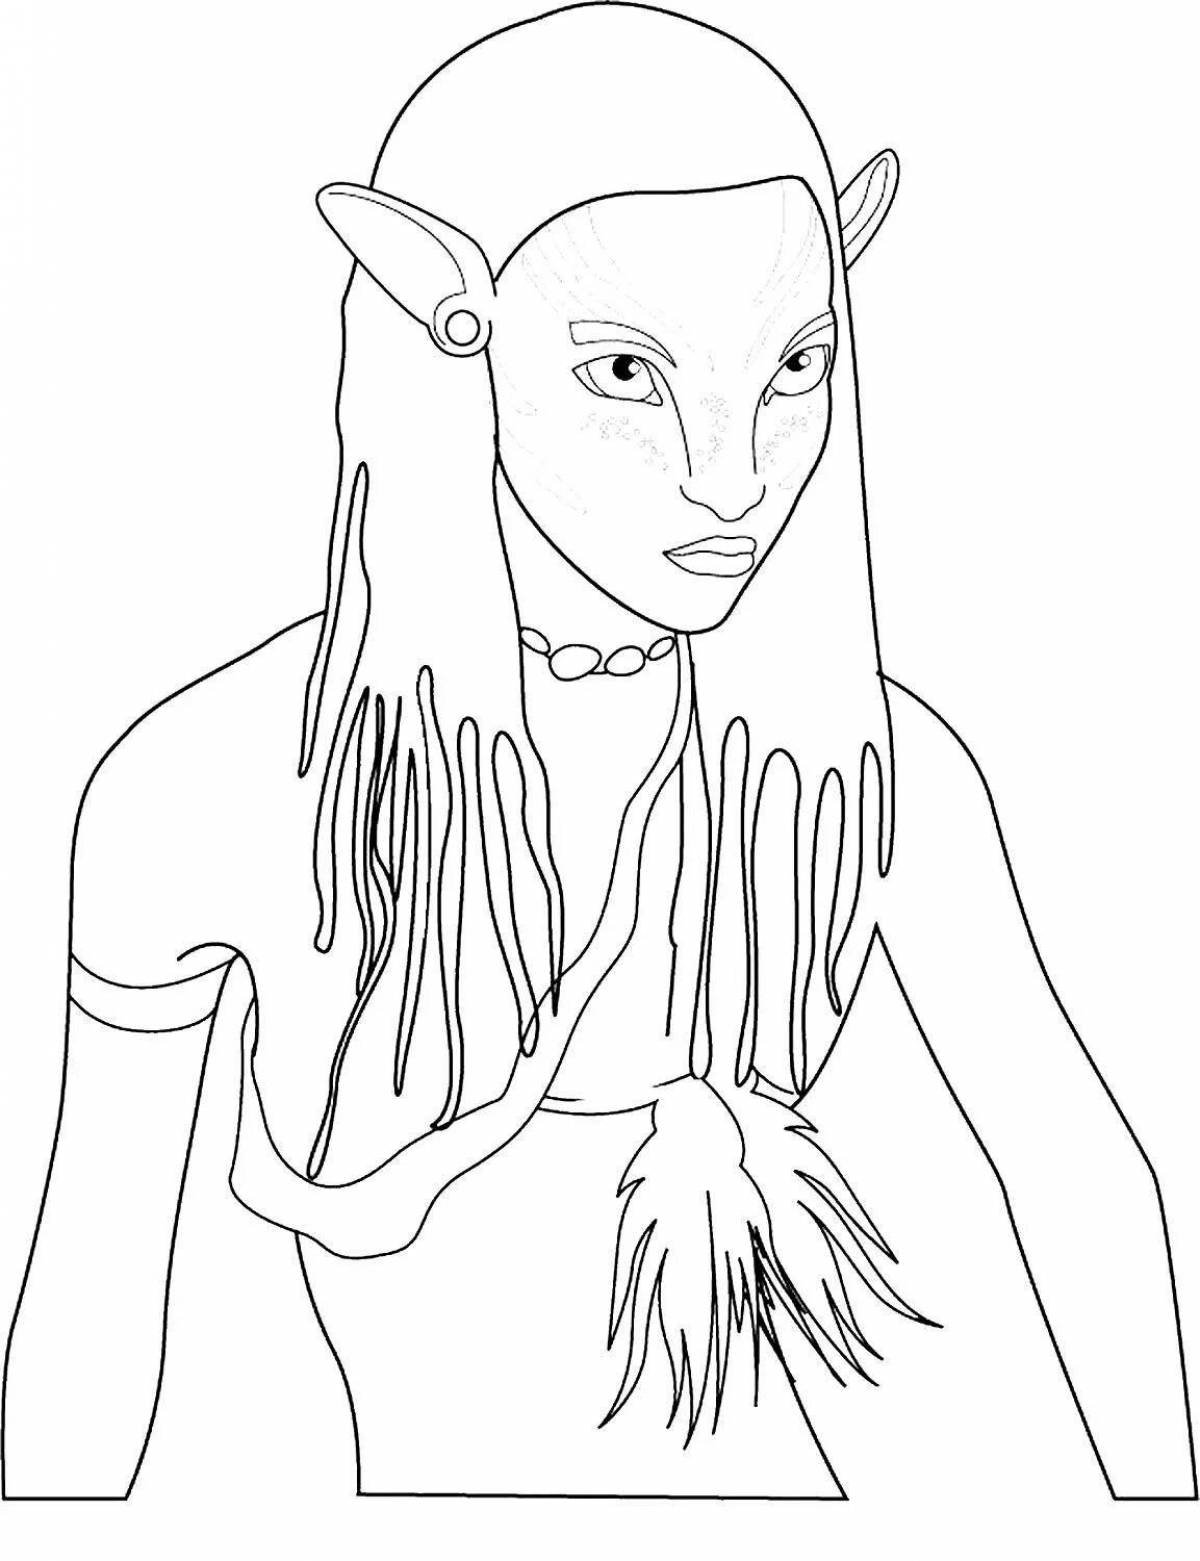 Color-delight avatar coloring page for kids